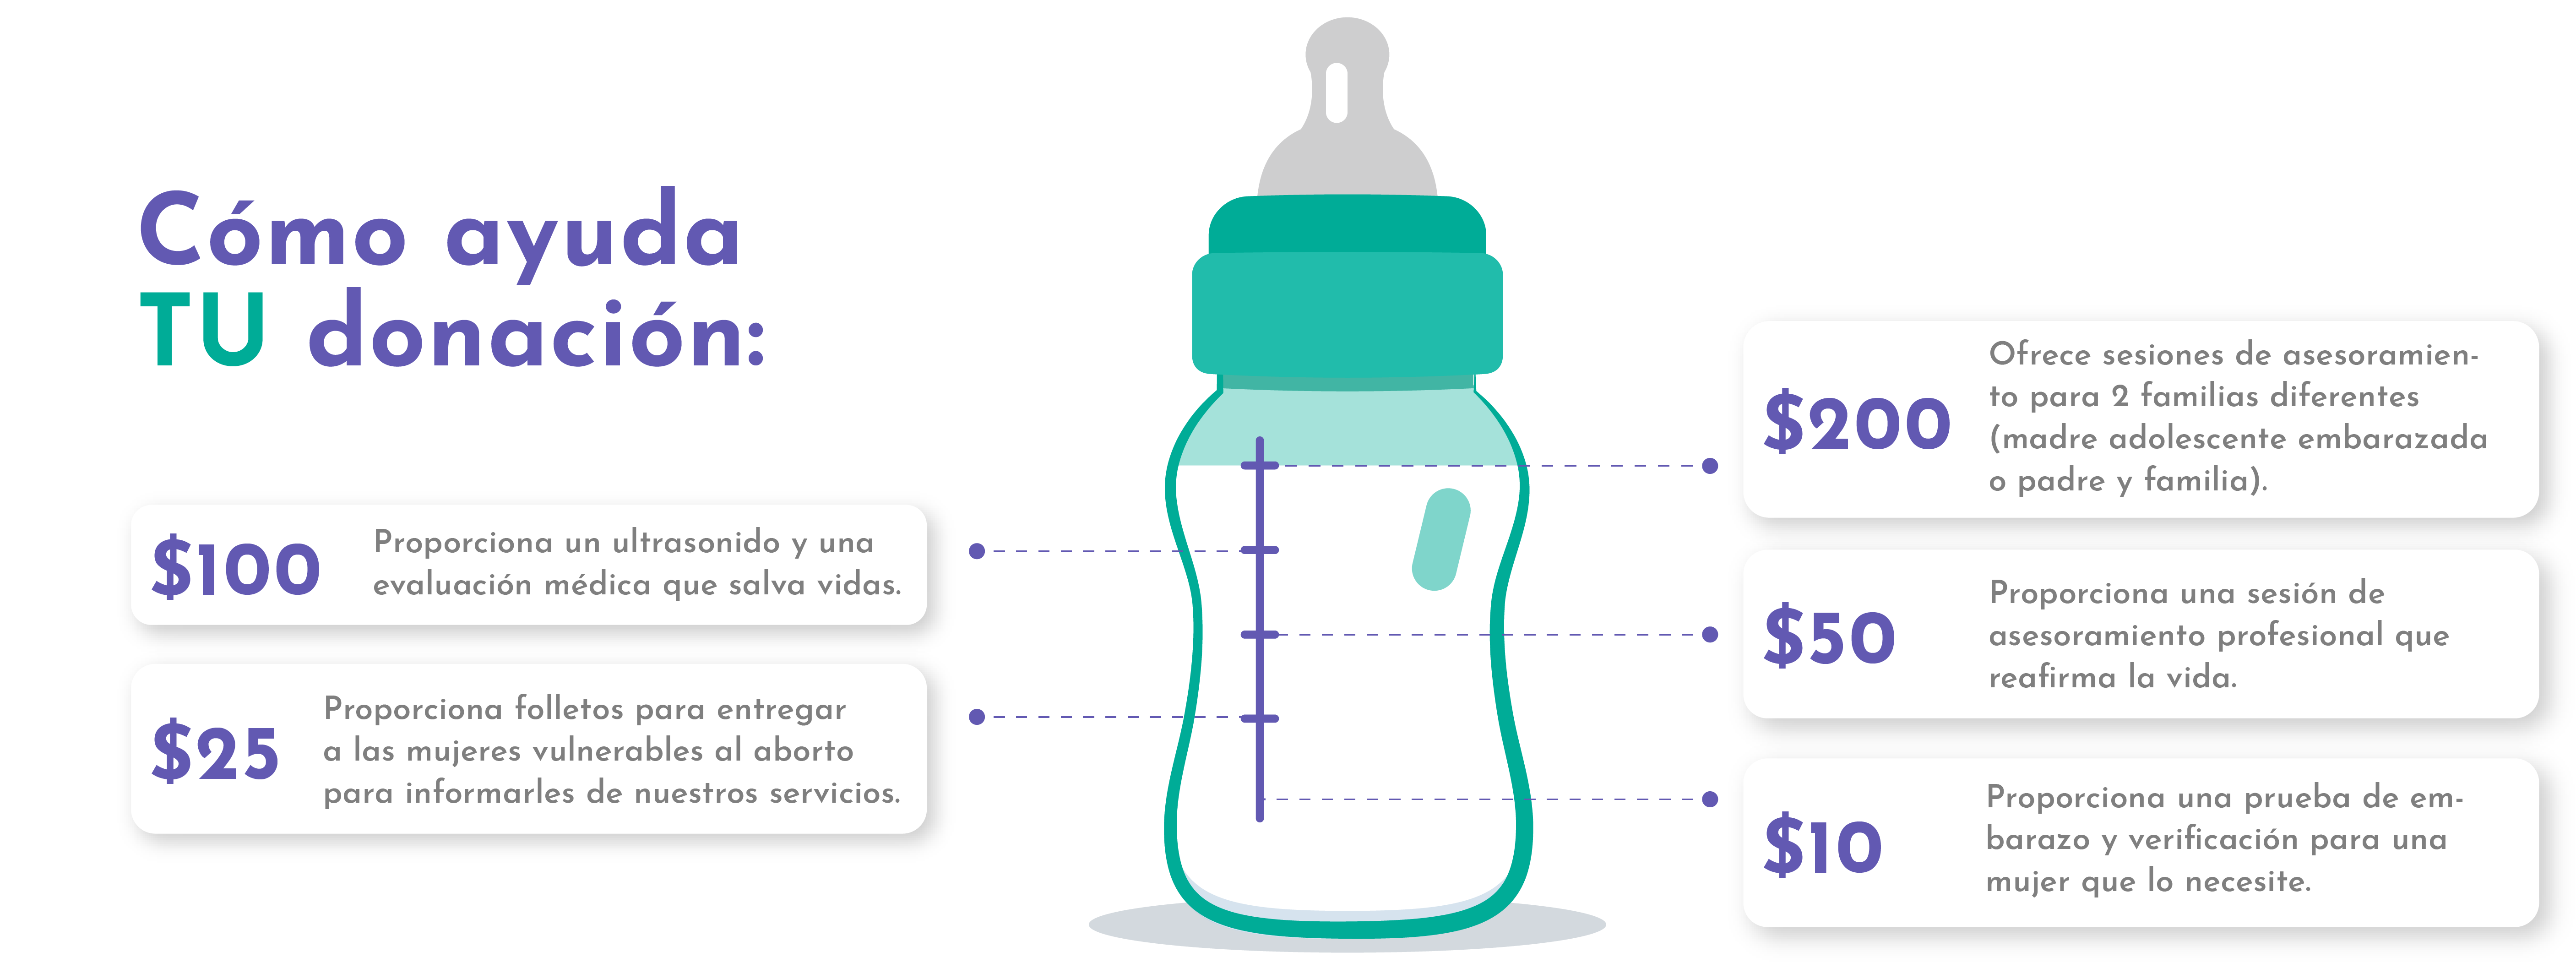 Baby-Bottle-Campaign-Graphic